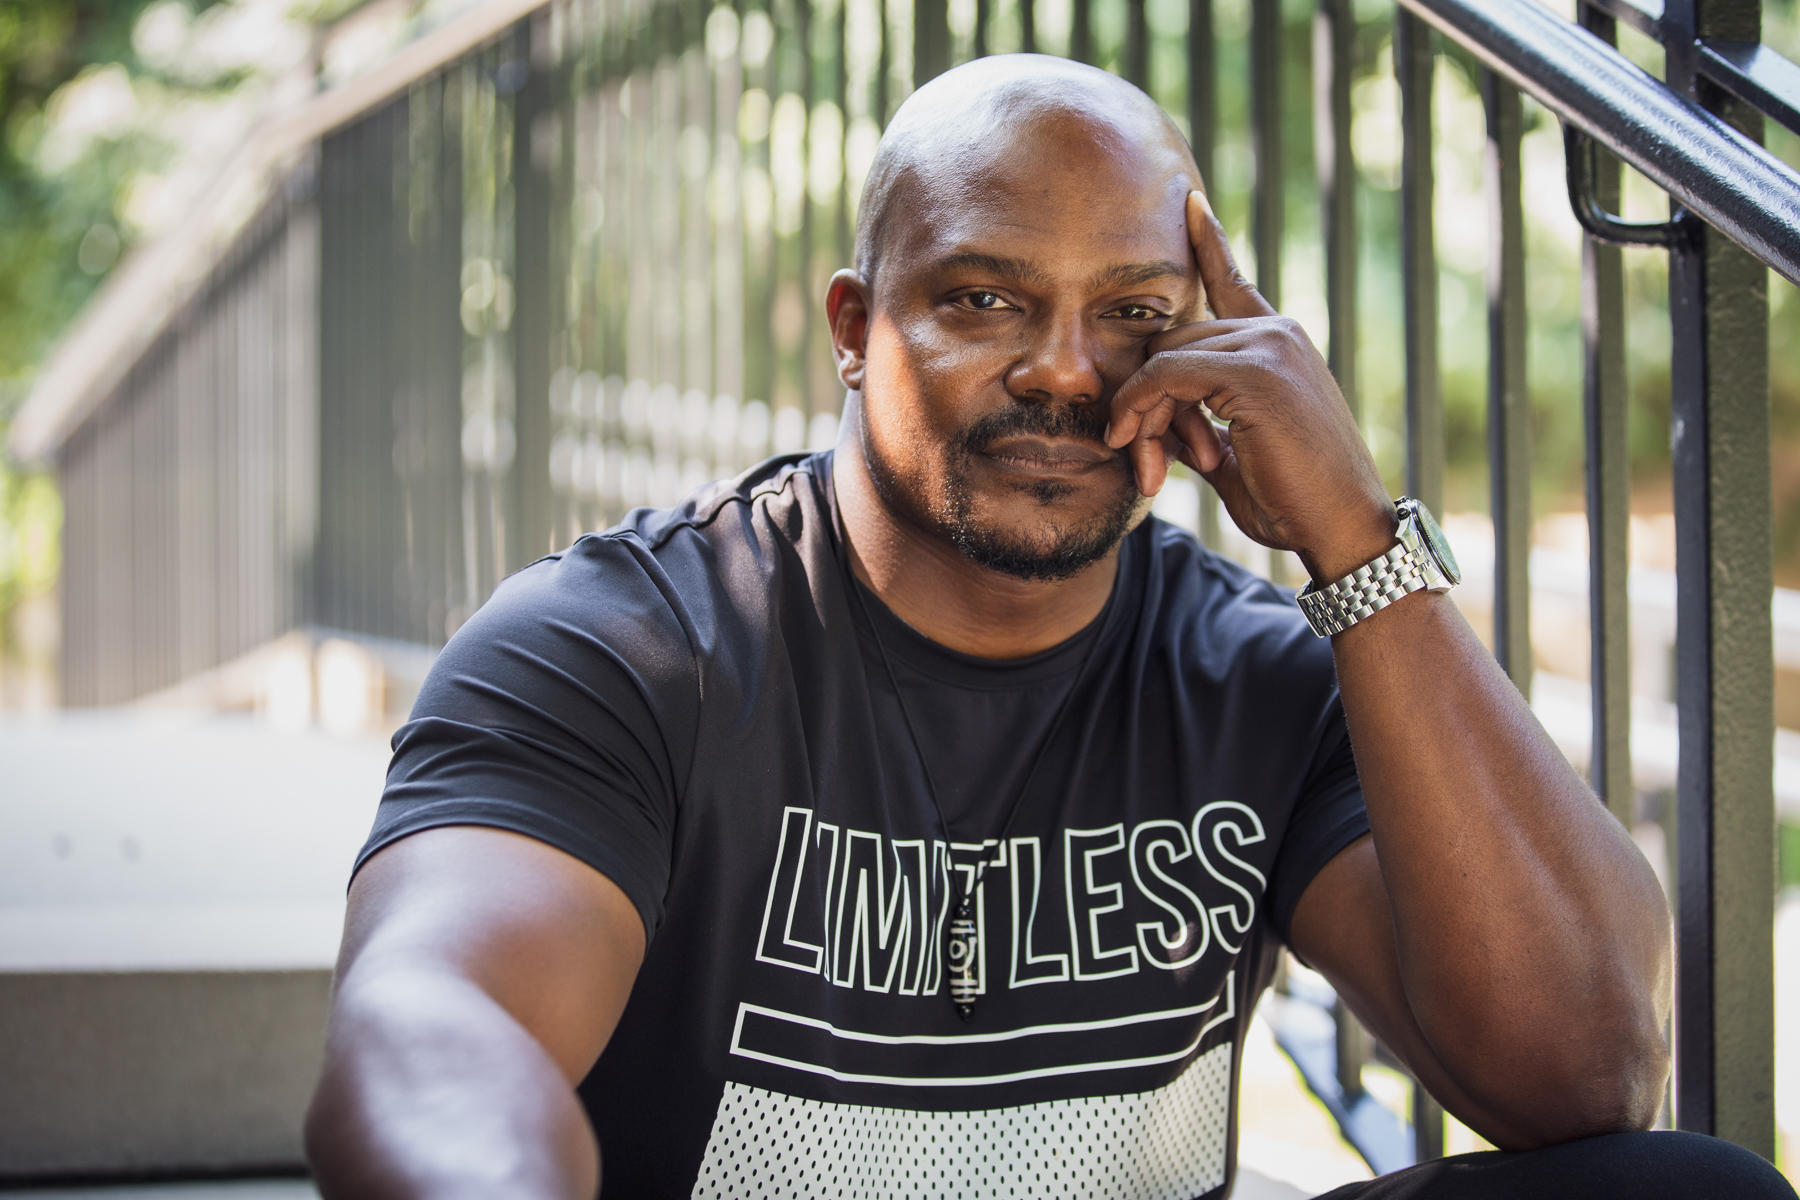 Featured image: Larry Brent Jr. on an outdoor concrete staircase next to metal railing. He wears a black t-shirt with the word "LIMITLESS" on it. His left hand is pressed up to his face, with his index finger on his temple. Photograph by Kristie Kahns.